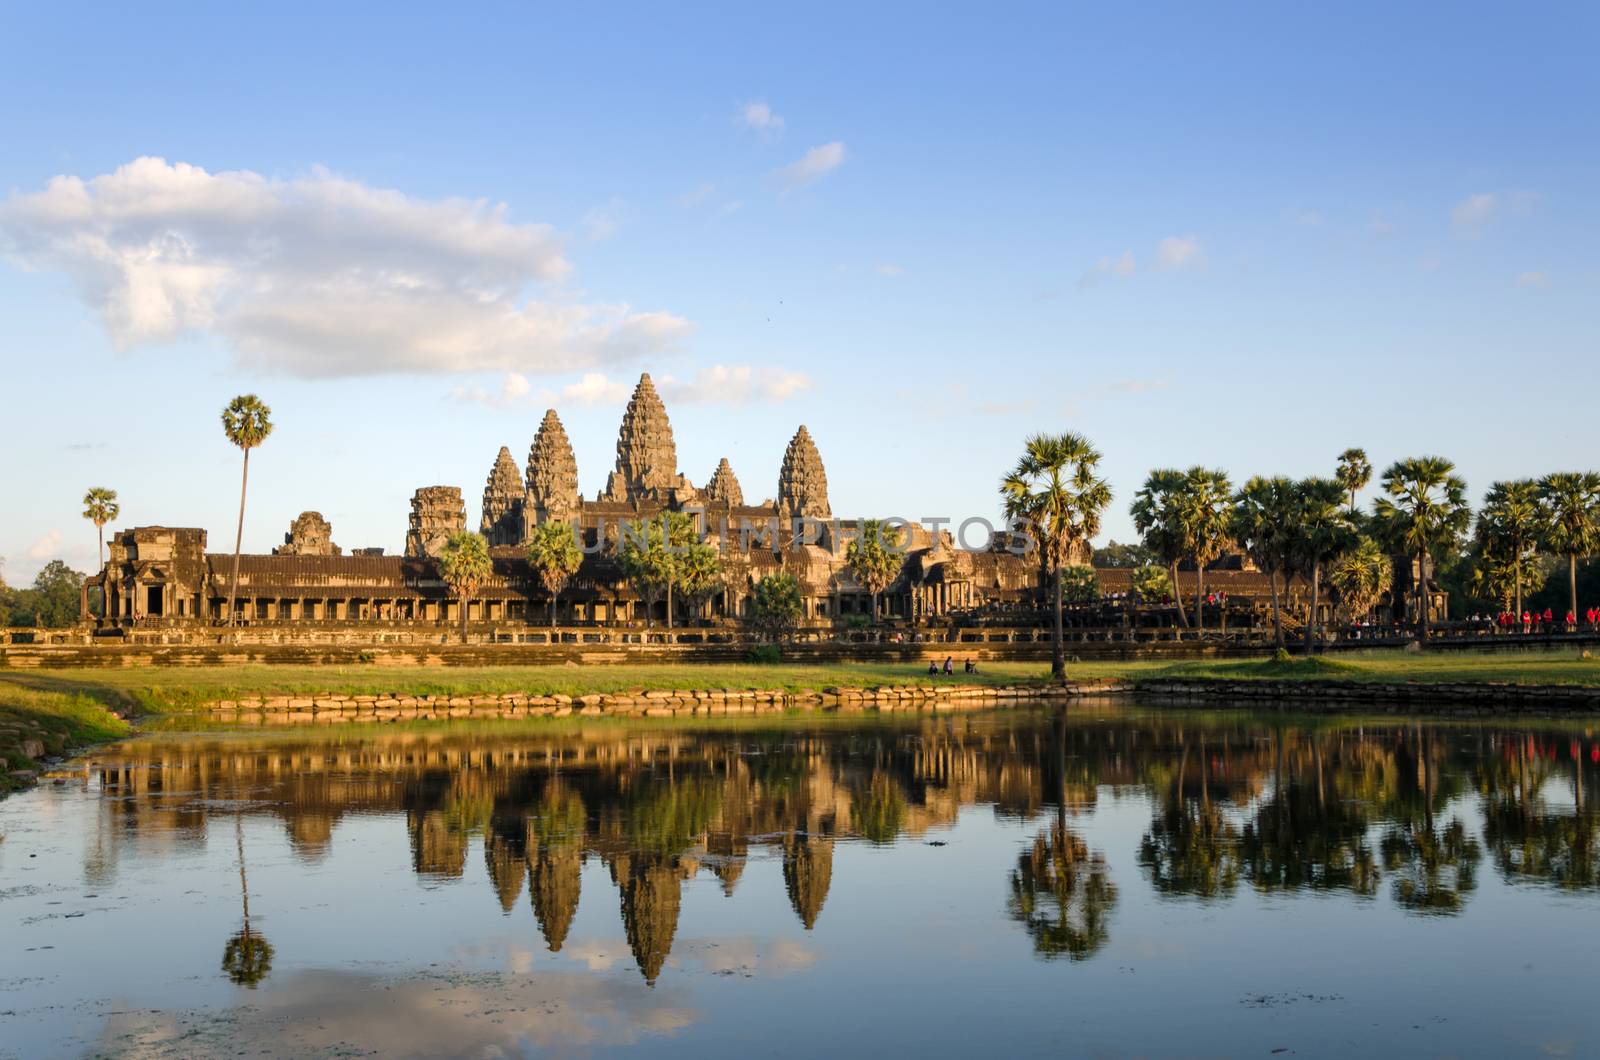 Angkor Wat at sunset with reflection in water by siraanamwong